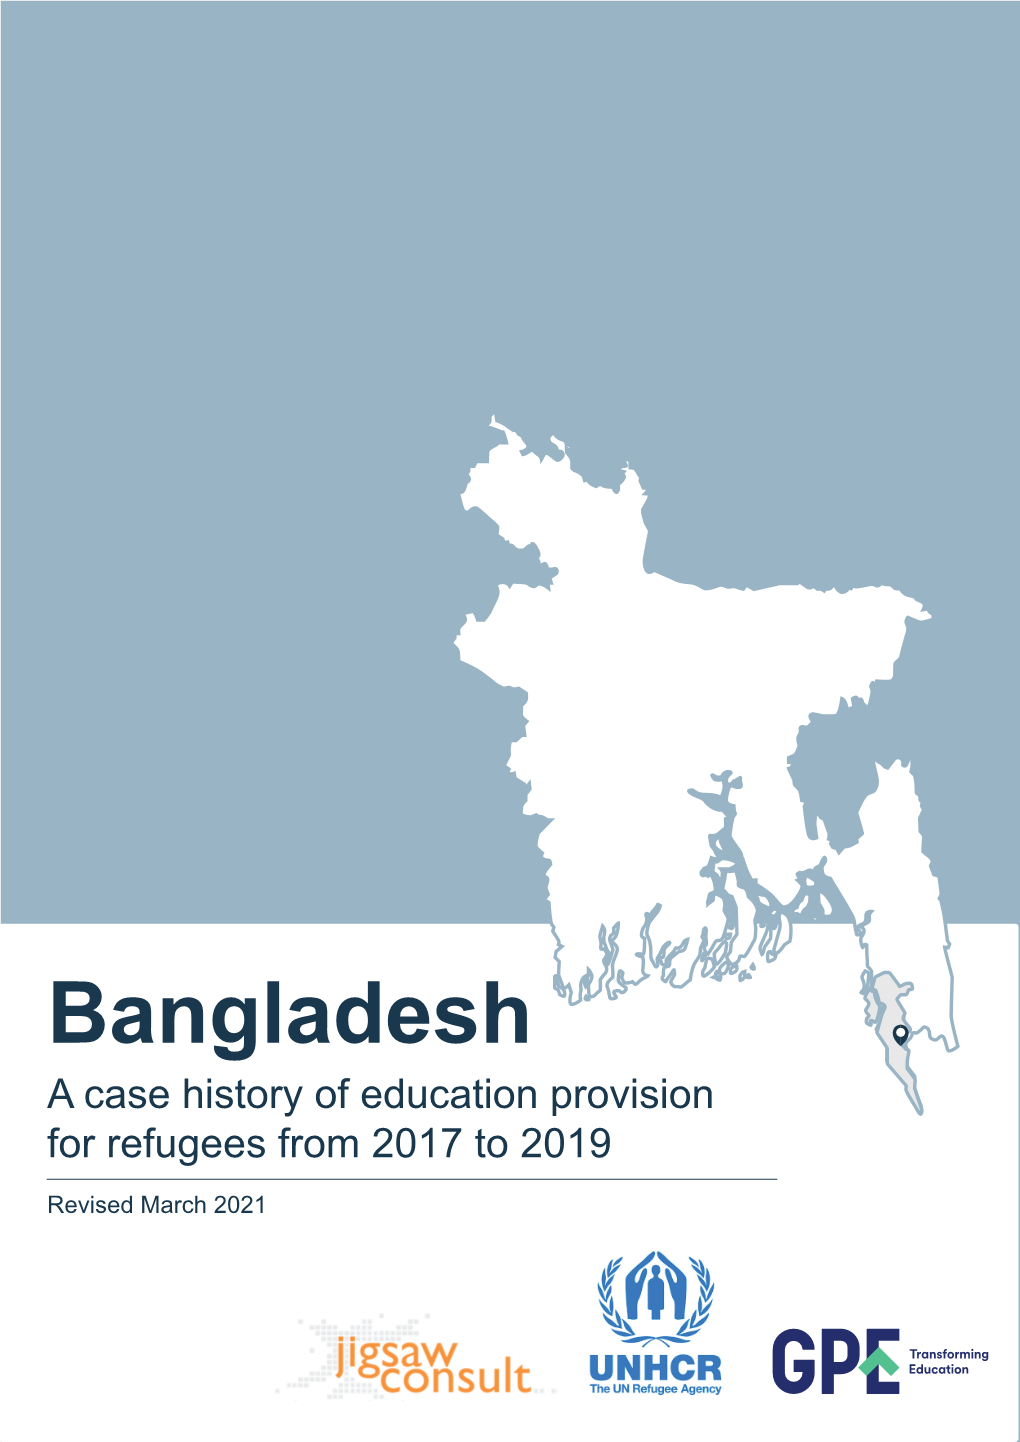 Bangladesh a Case History of Education Provision for Refugees from 2017 to 2019